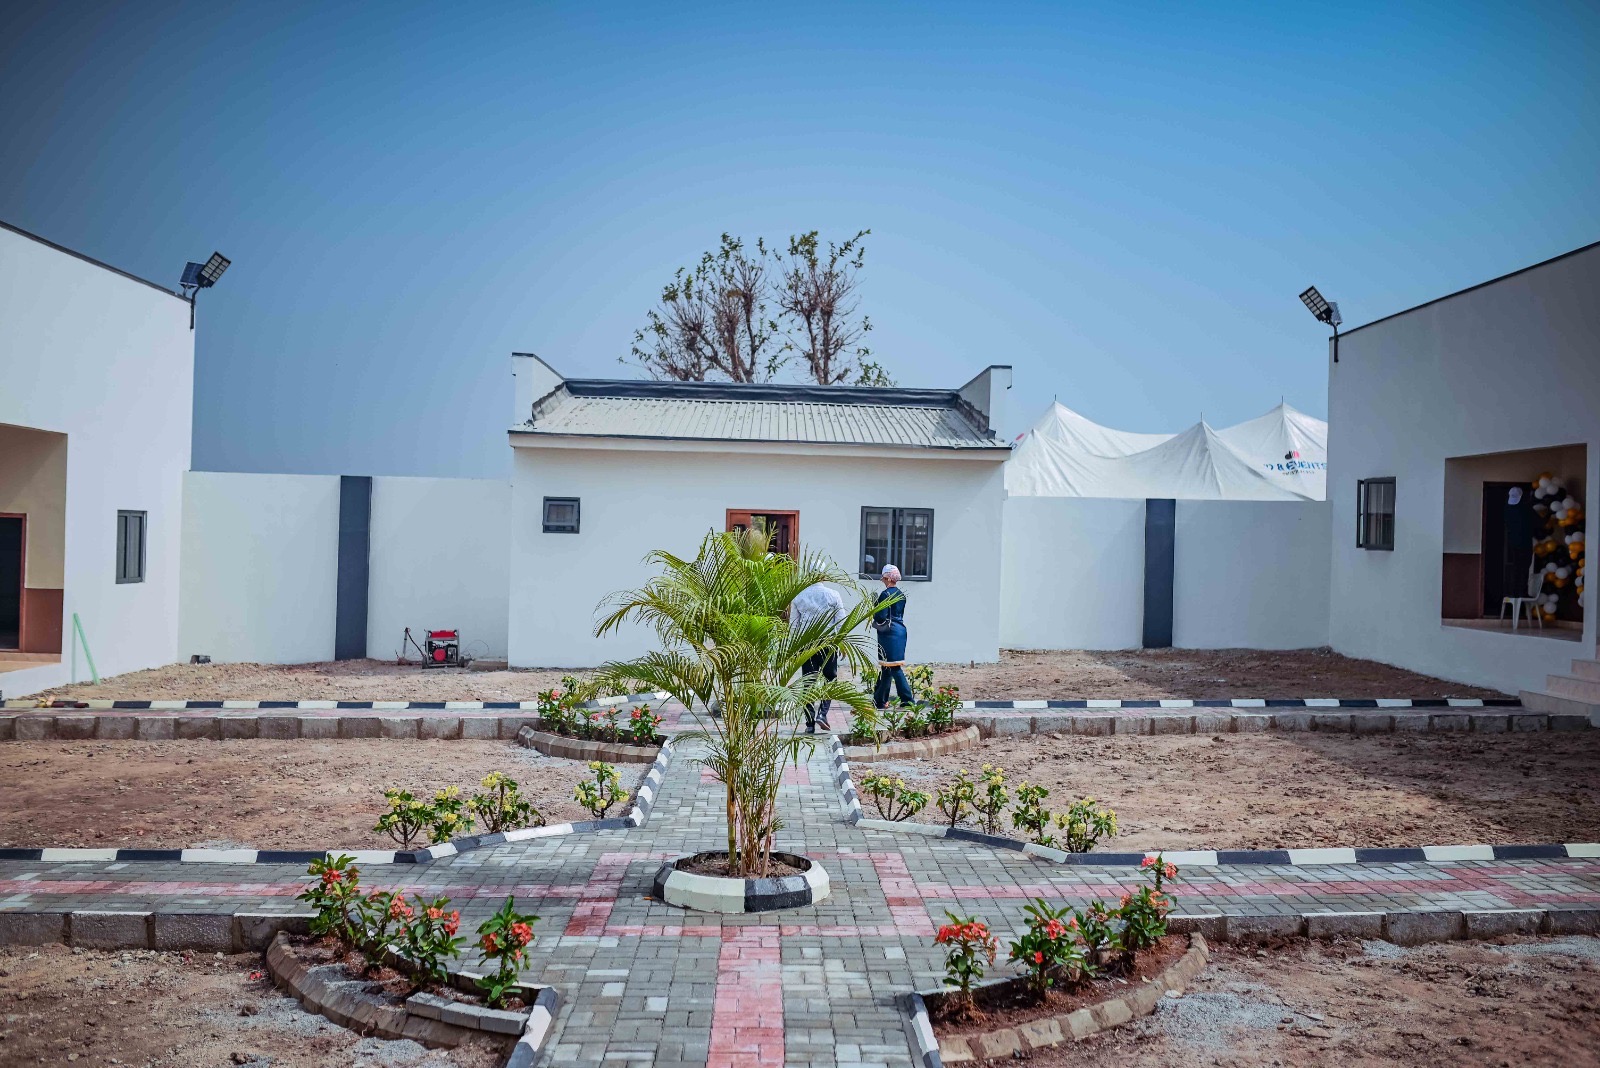 Vento Furniture Builds Hostel for the University of Abuja